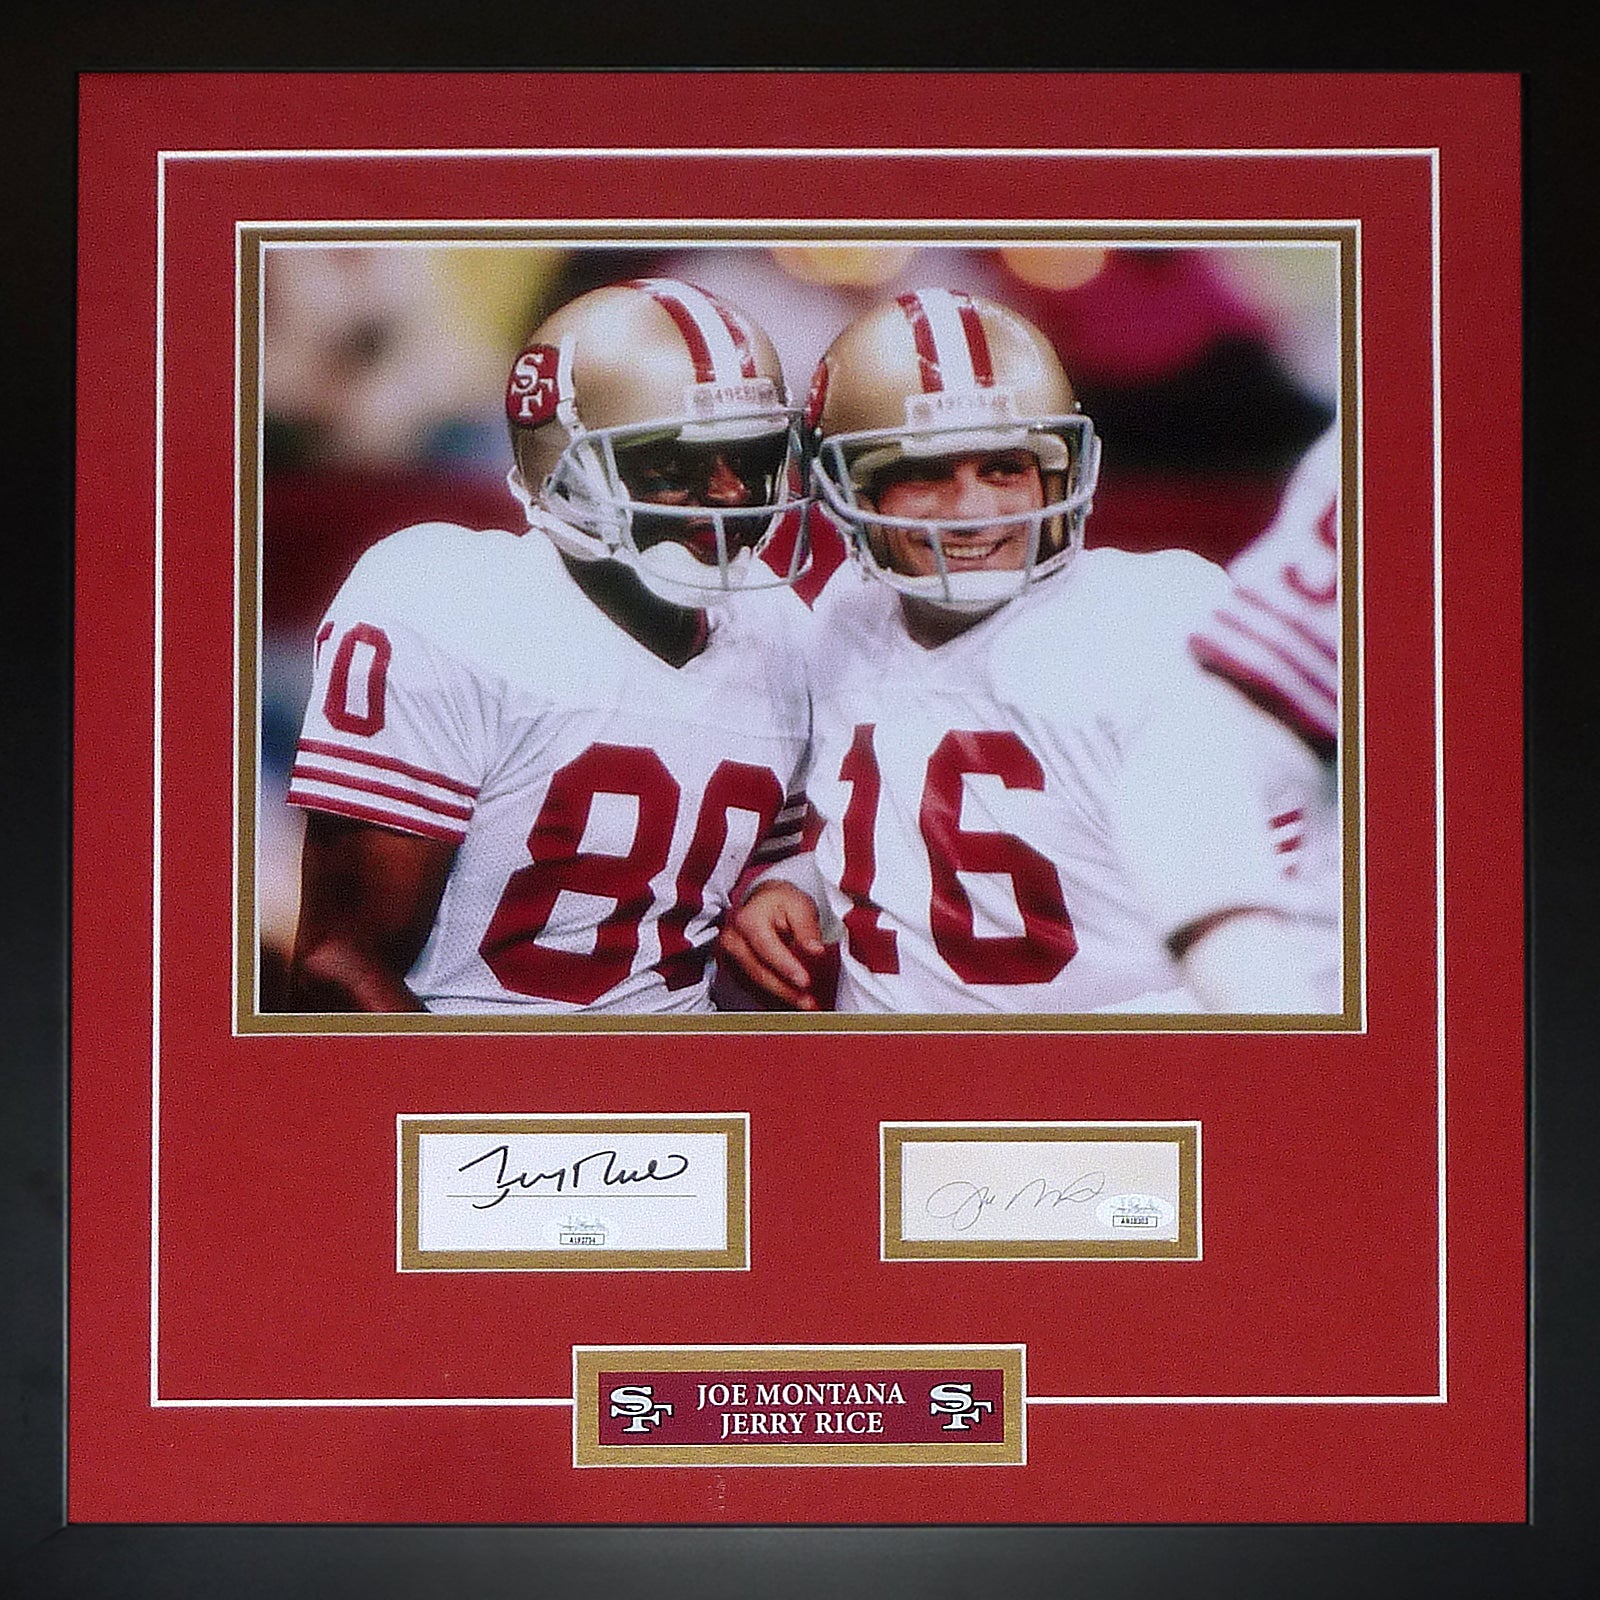 Jerry Rice And Joe Montana Autographed San Francisco 49ers Deluxe Framed 11x14 Photo Piece - JSA